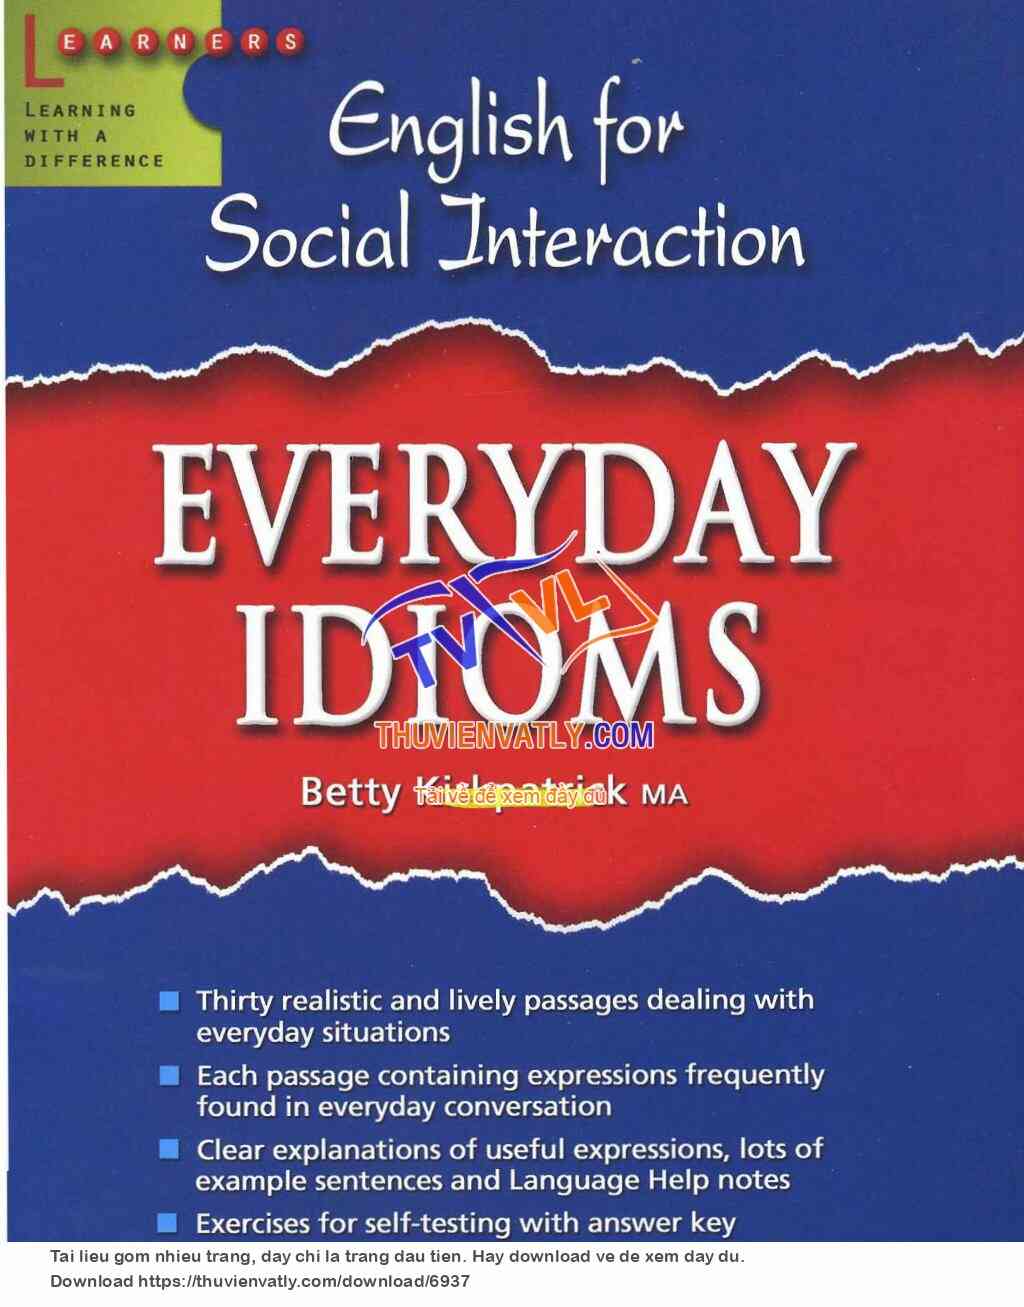 Everyday Idioms (English for Social Interaction)